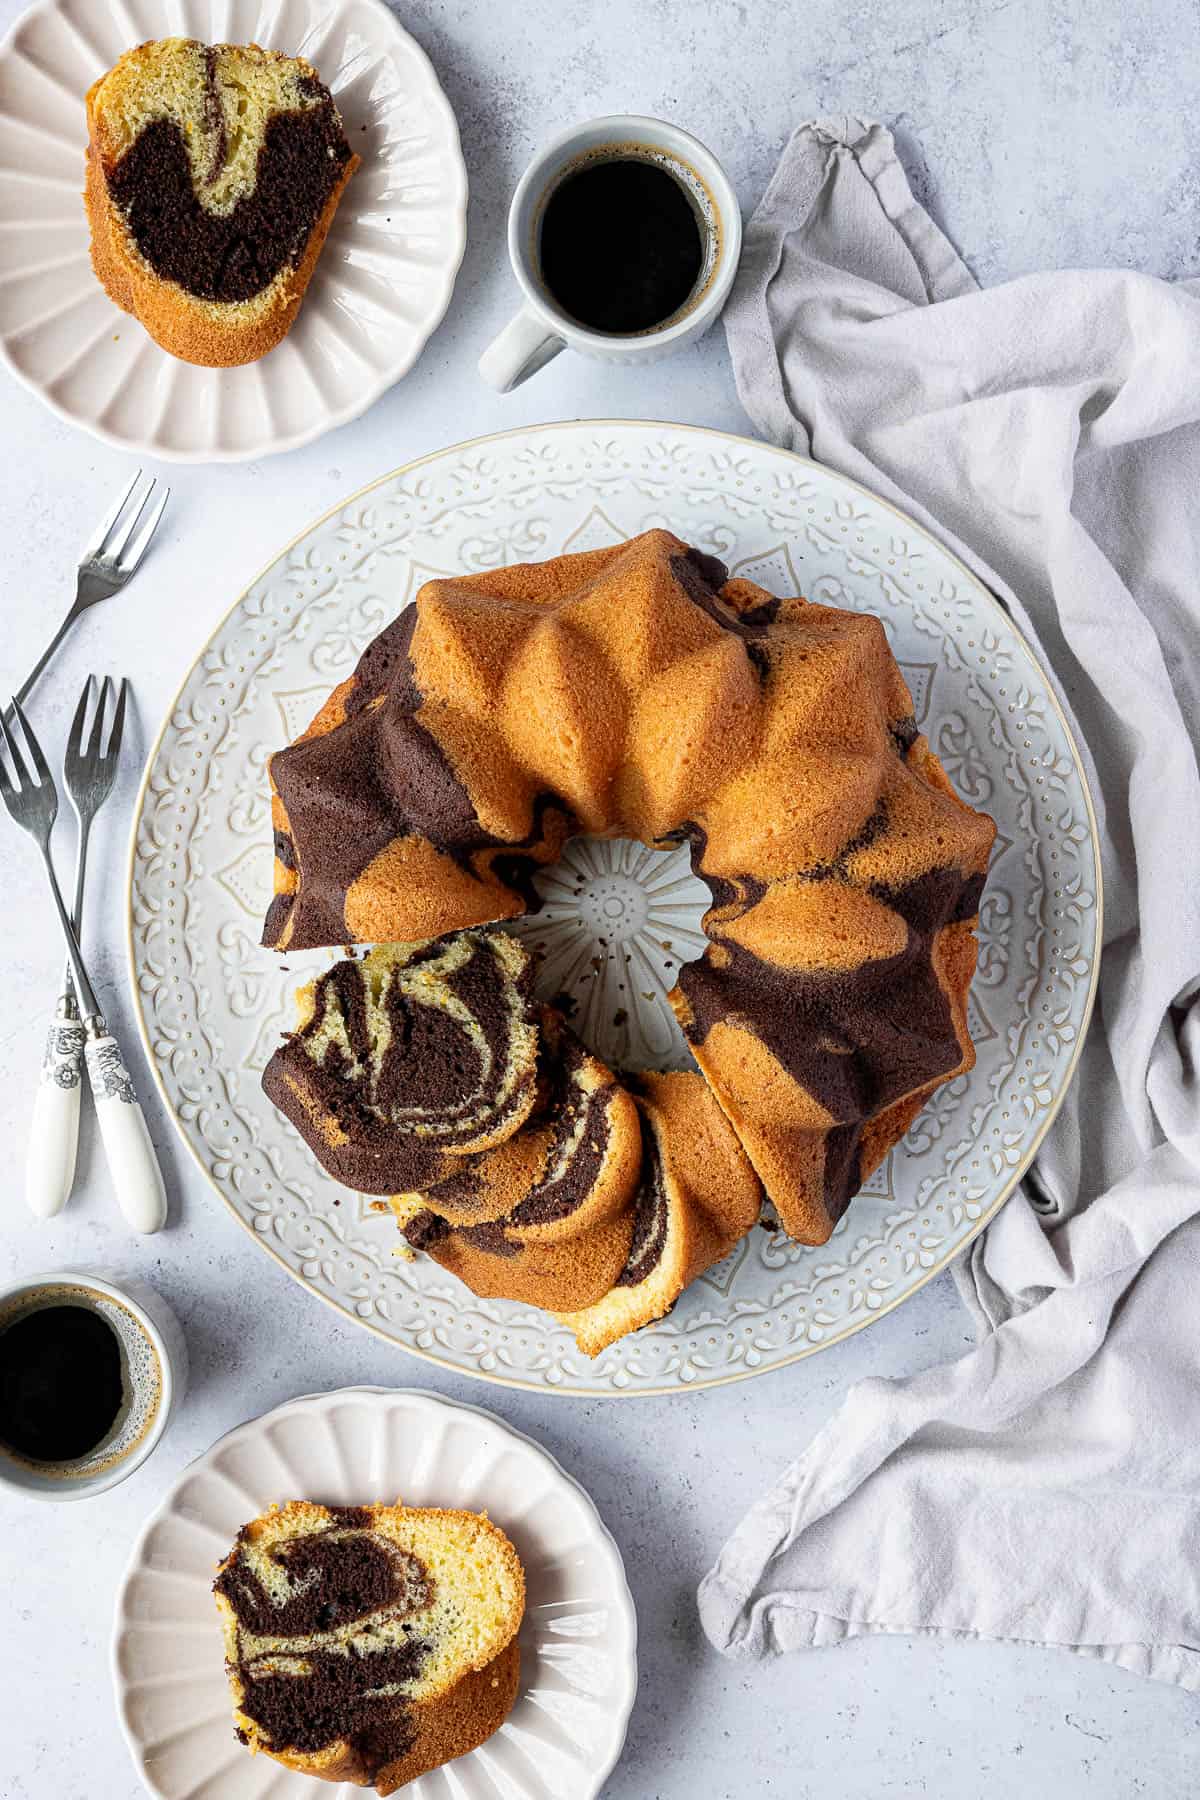 Chocolate orange bundt cake on a white plate with plates of cake and cups of coffee.